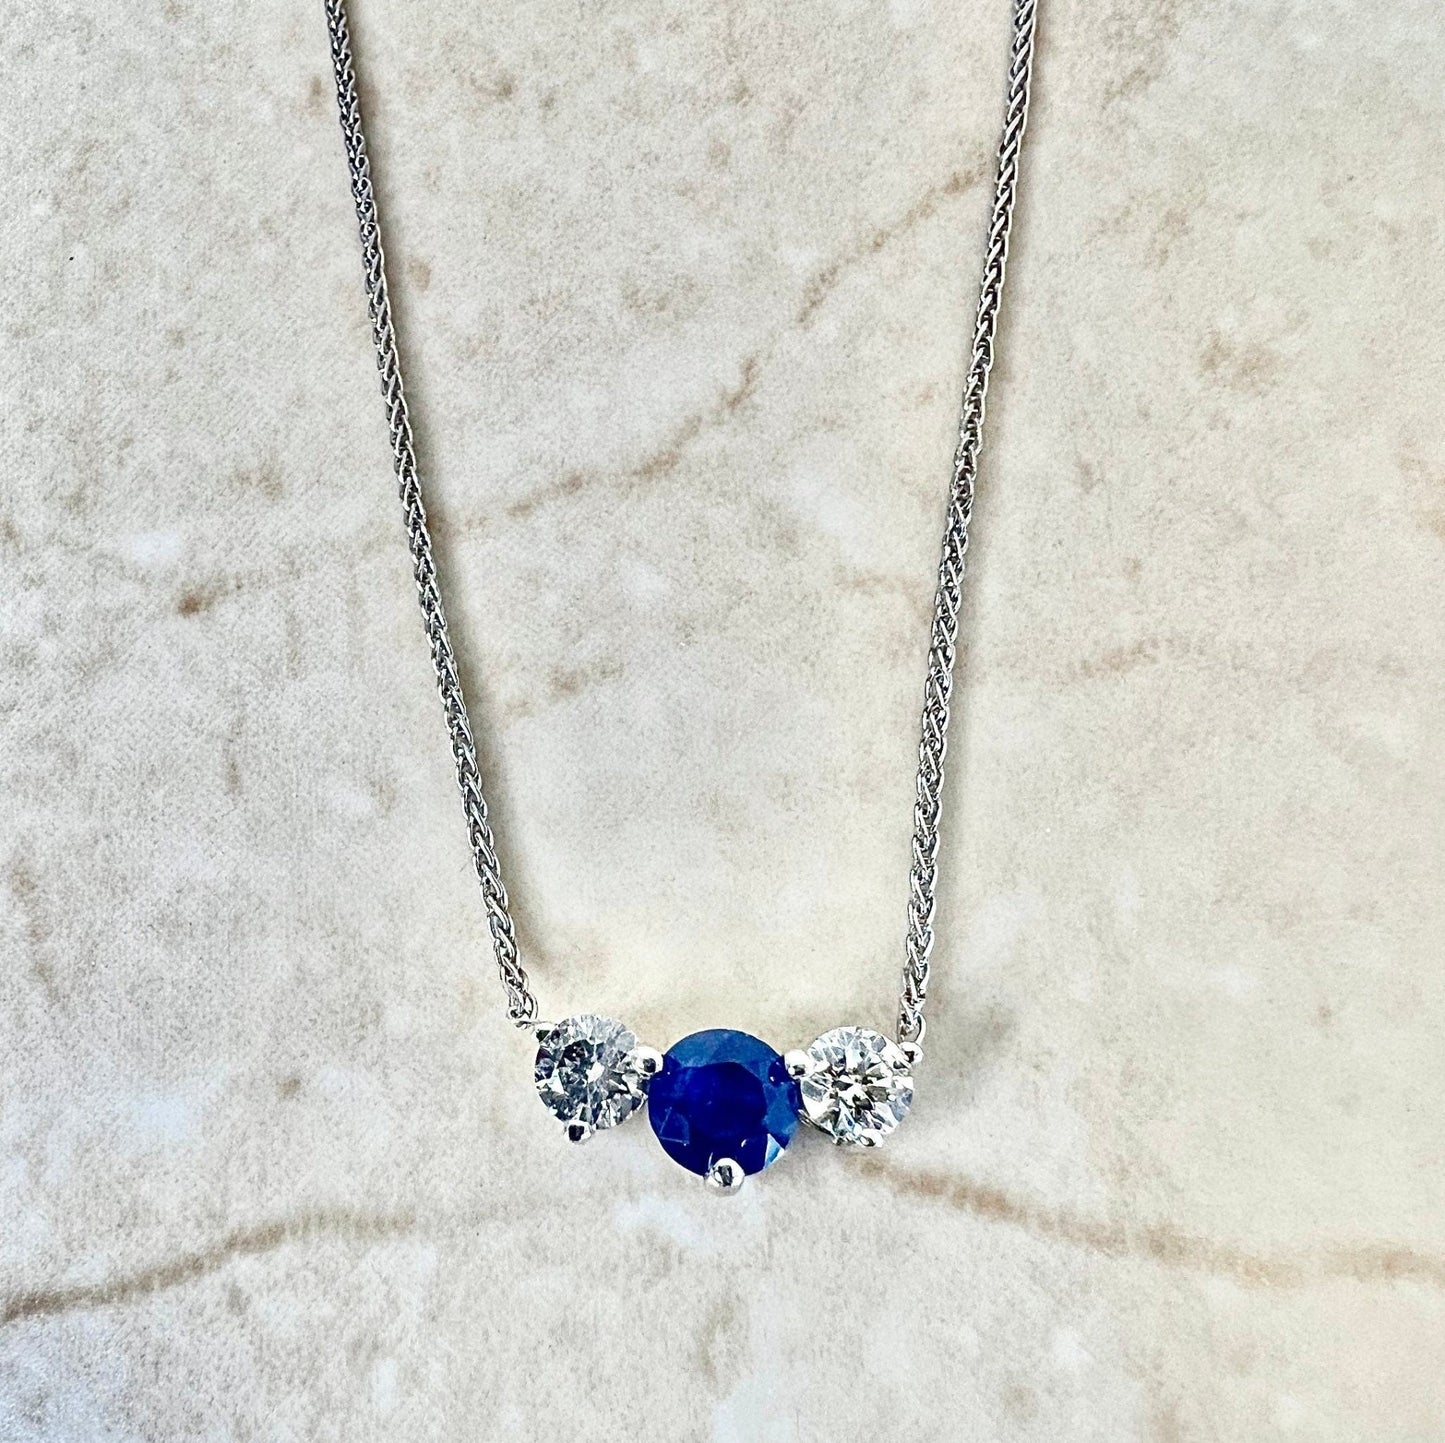 Fine 14K Sapphire & Diamond 3 Stone Pendant Necklace - Sapphire Necklace - Birthday Gift - April September Birthstone Best Gifts For Her